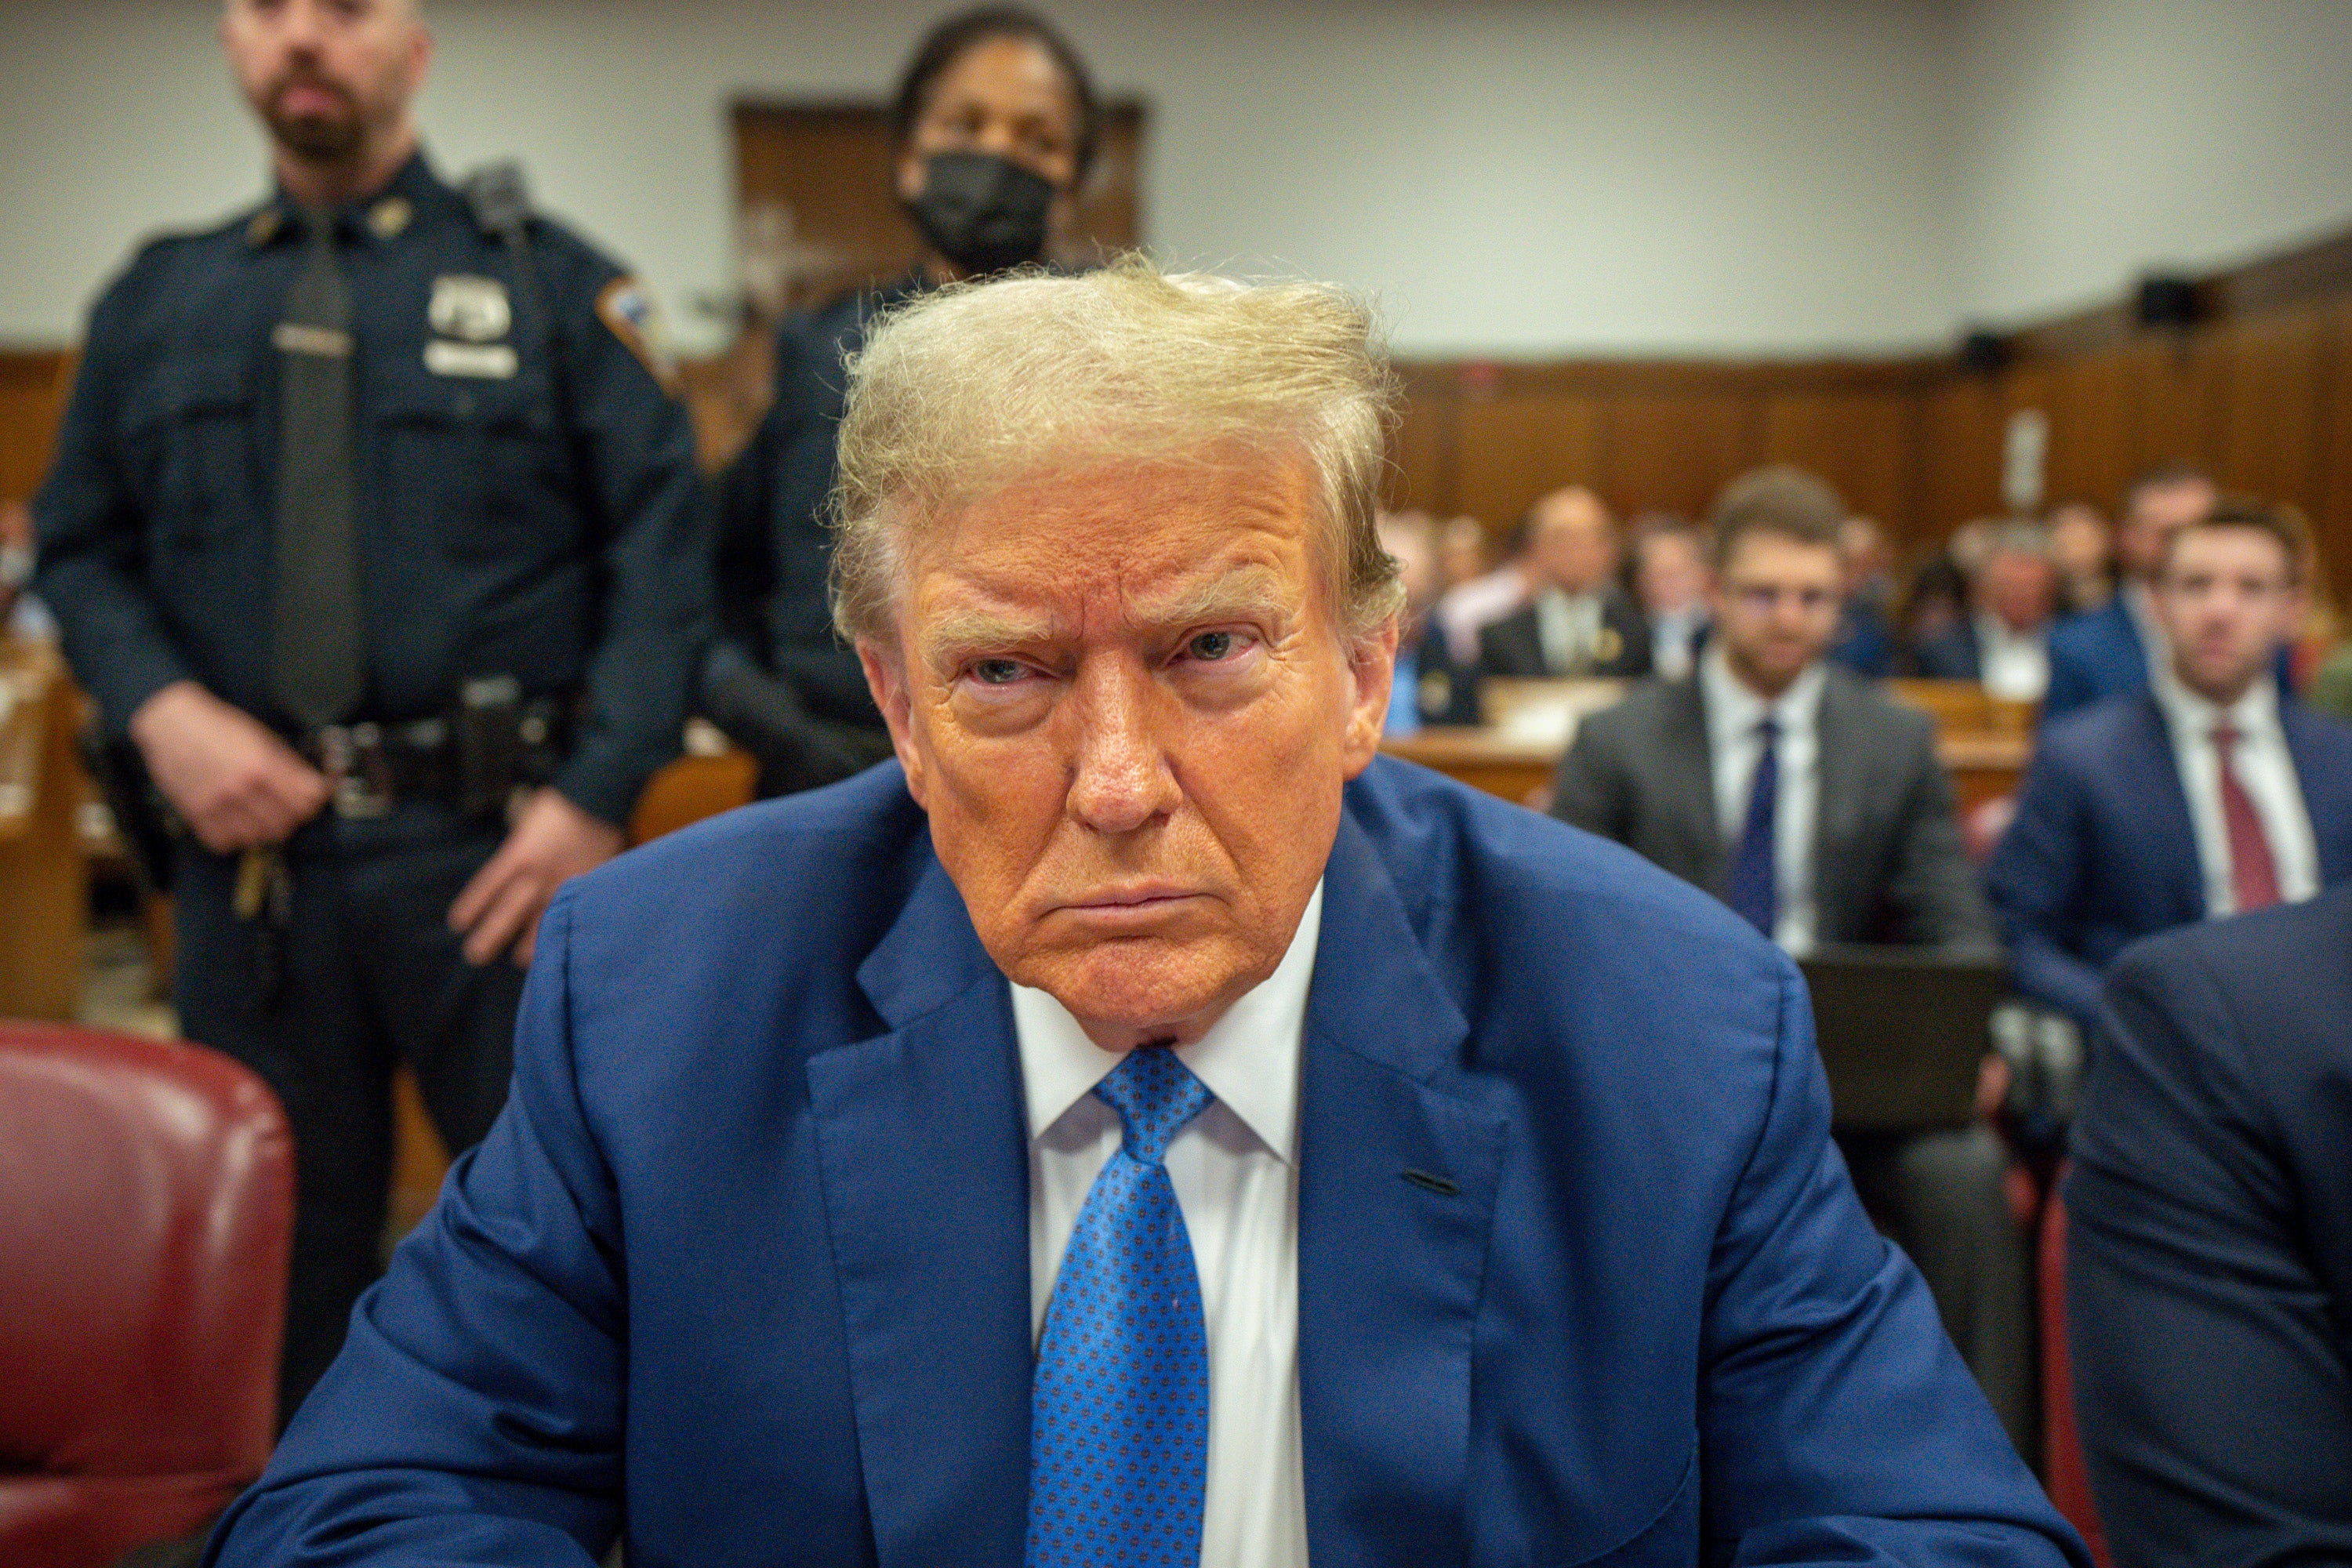 Donald Trump, pictured here in a Manhattan courthouse, may end up gagged in his Mar-a-Lago confidential documents case